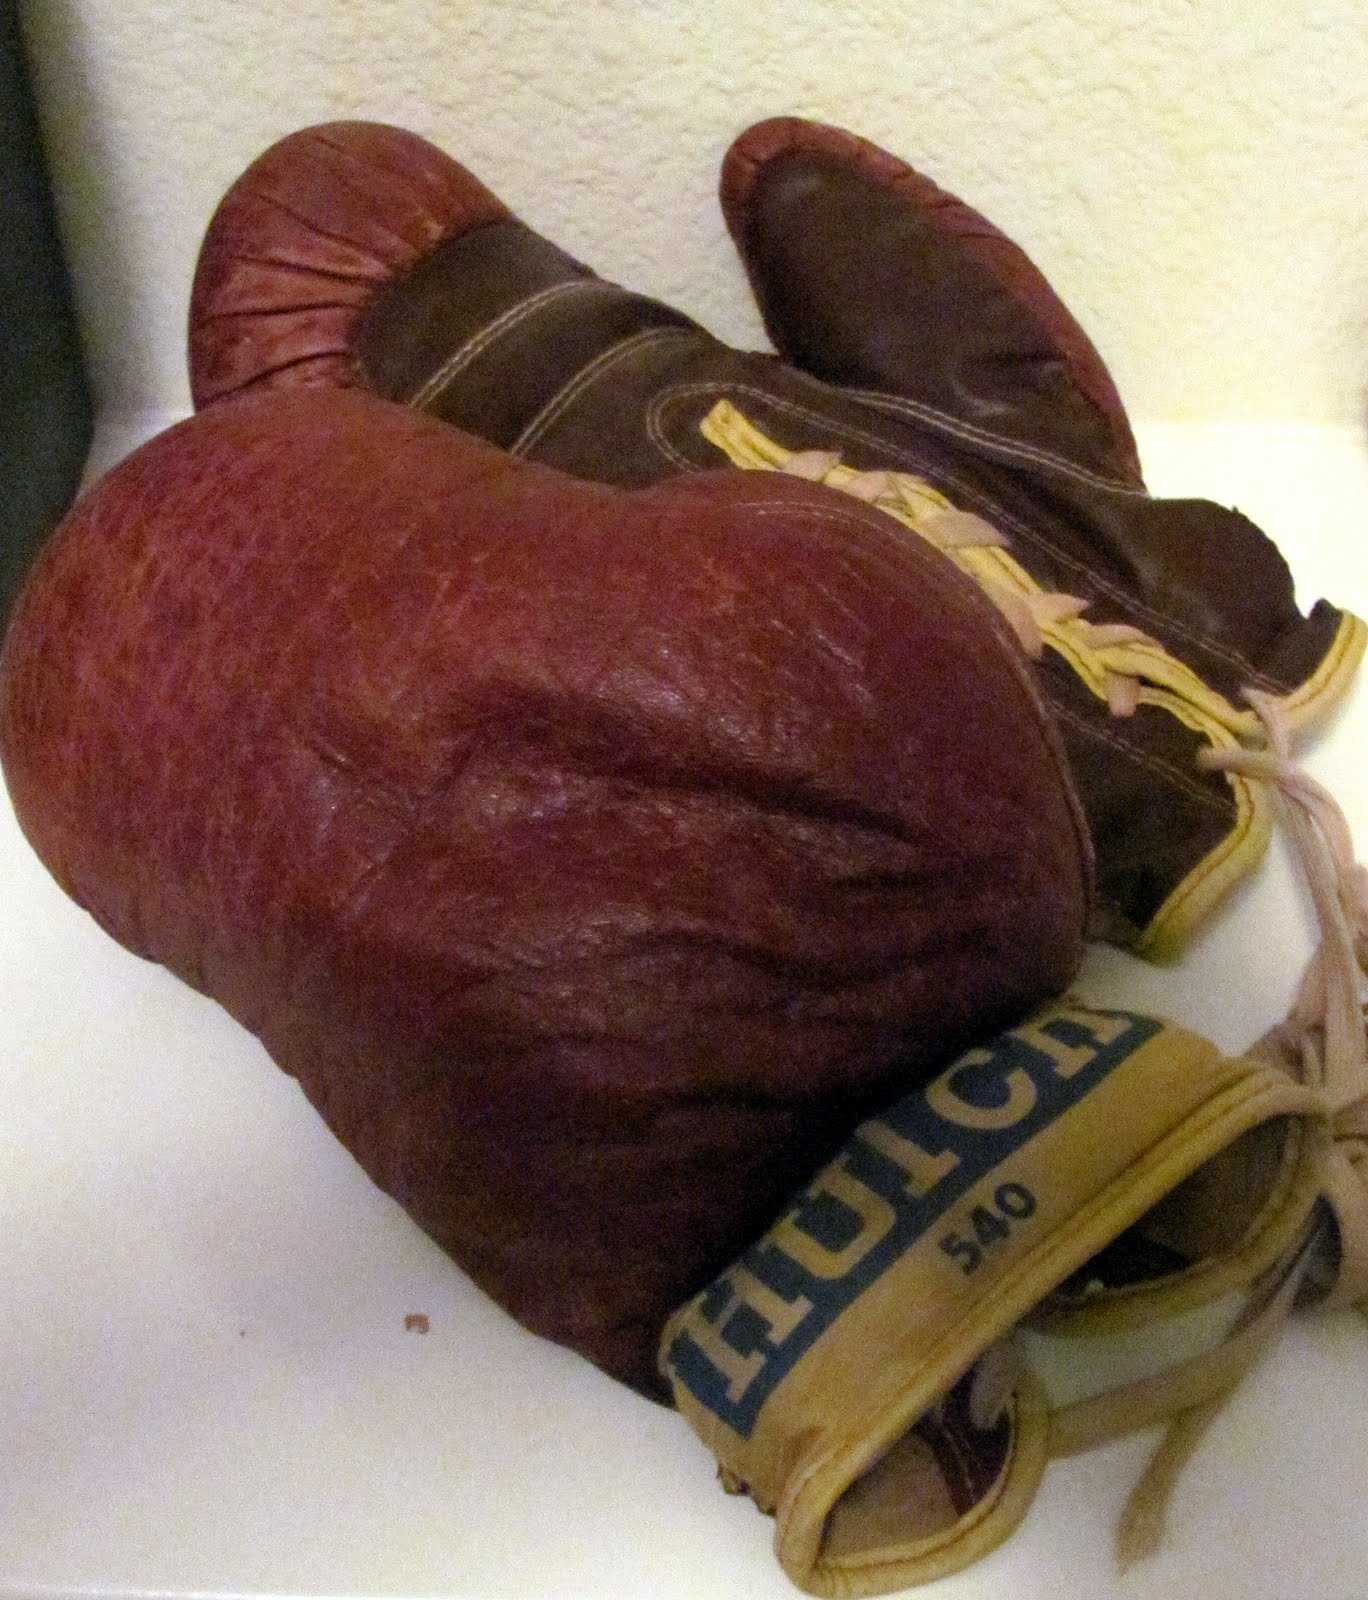 These old boxing gloves